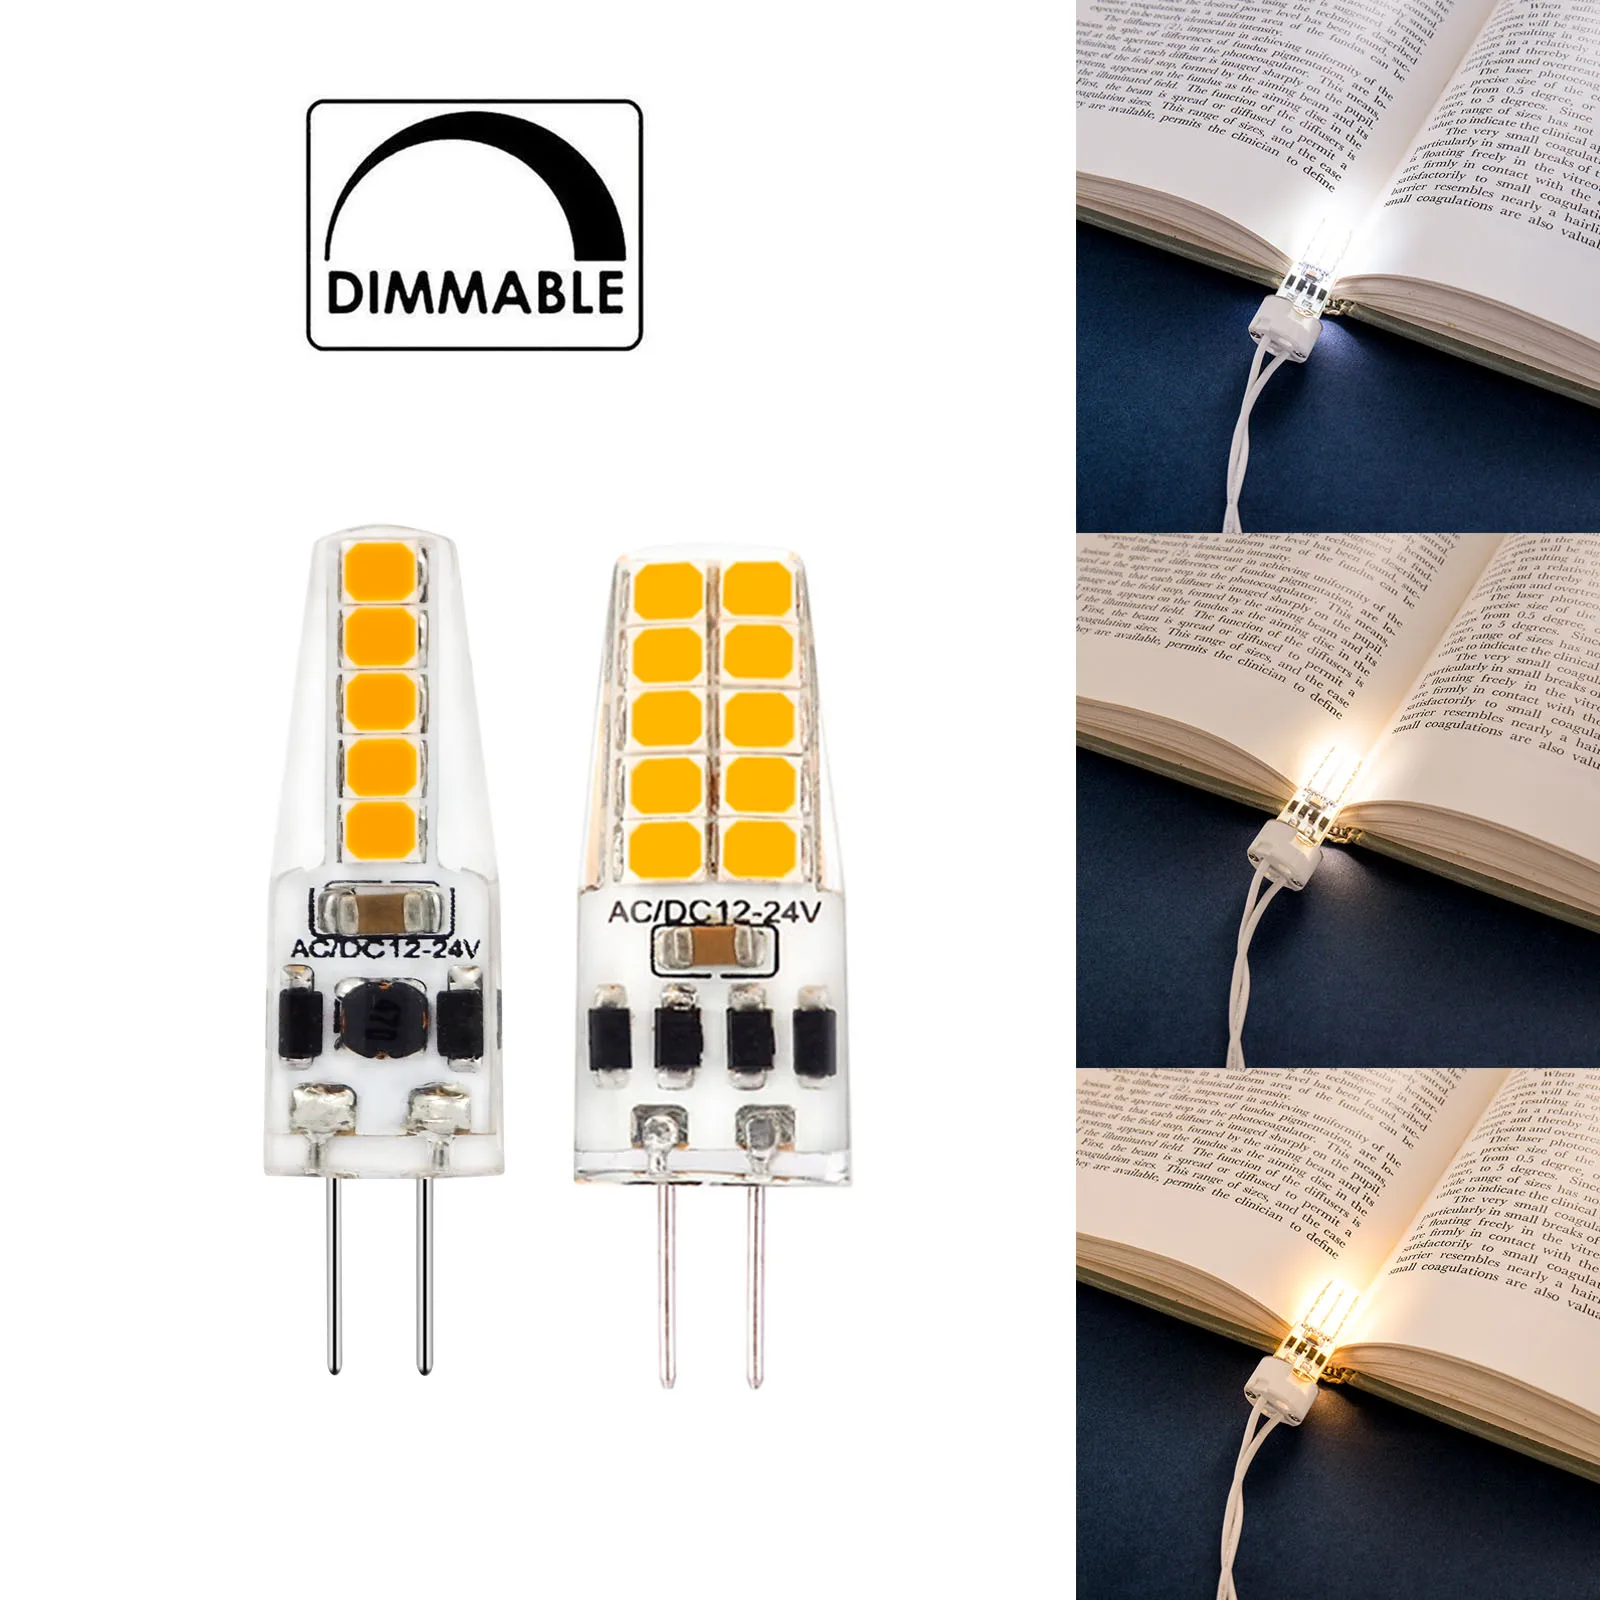 

Mini Dimmable G4 LED Silicone Crystal Light Bulbs AC/DC 12V-24V 3W 5W 2835 SMD Cold Warm Neutral White Replace Halogen Lamp